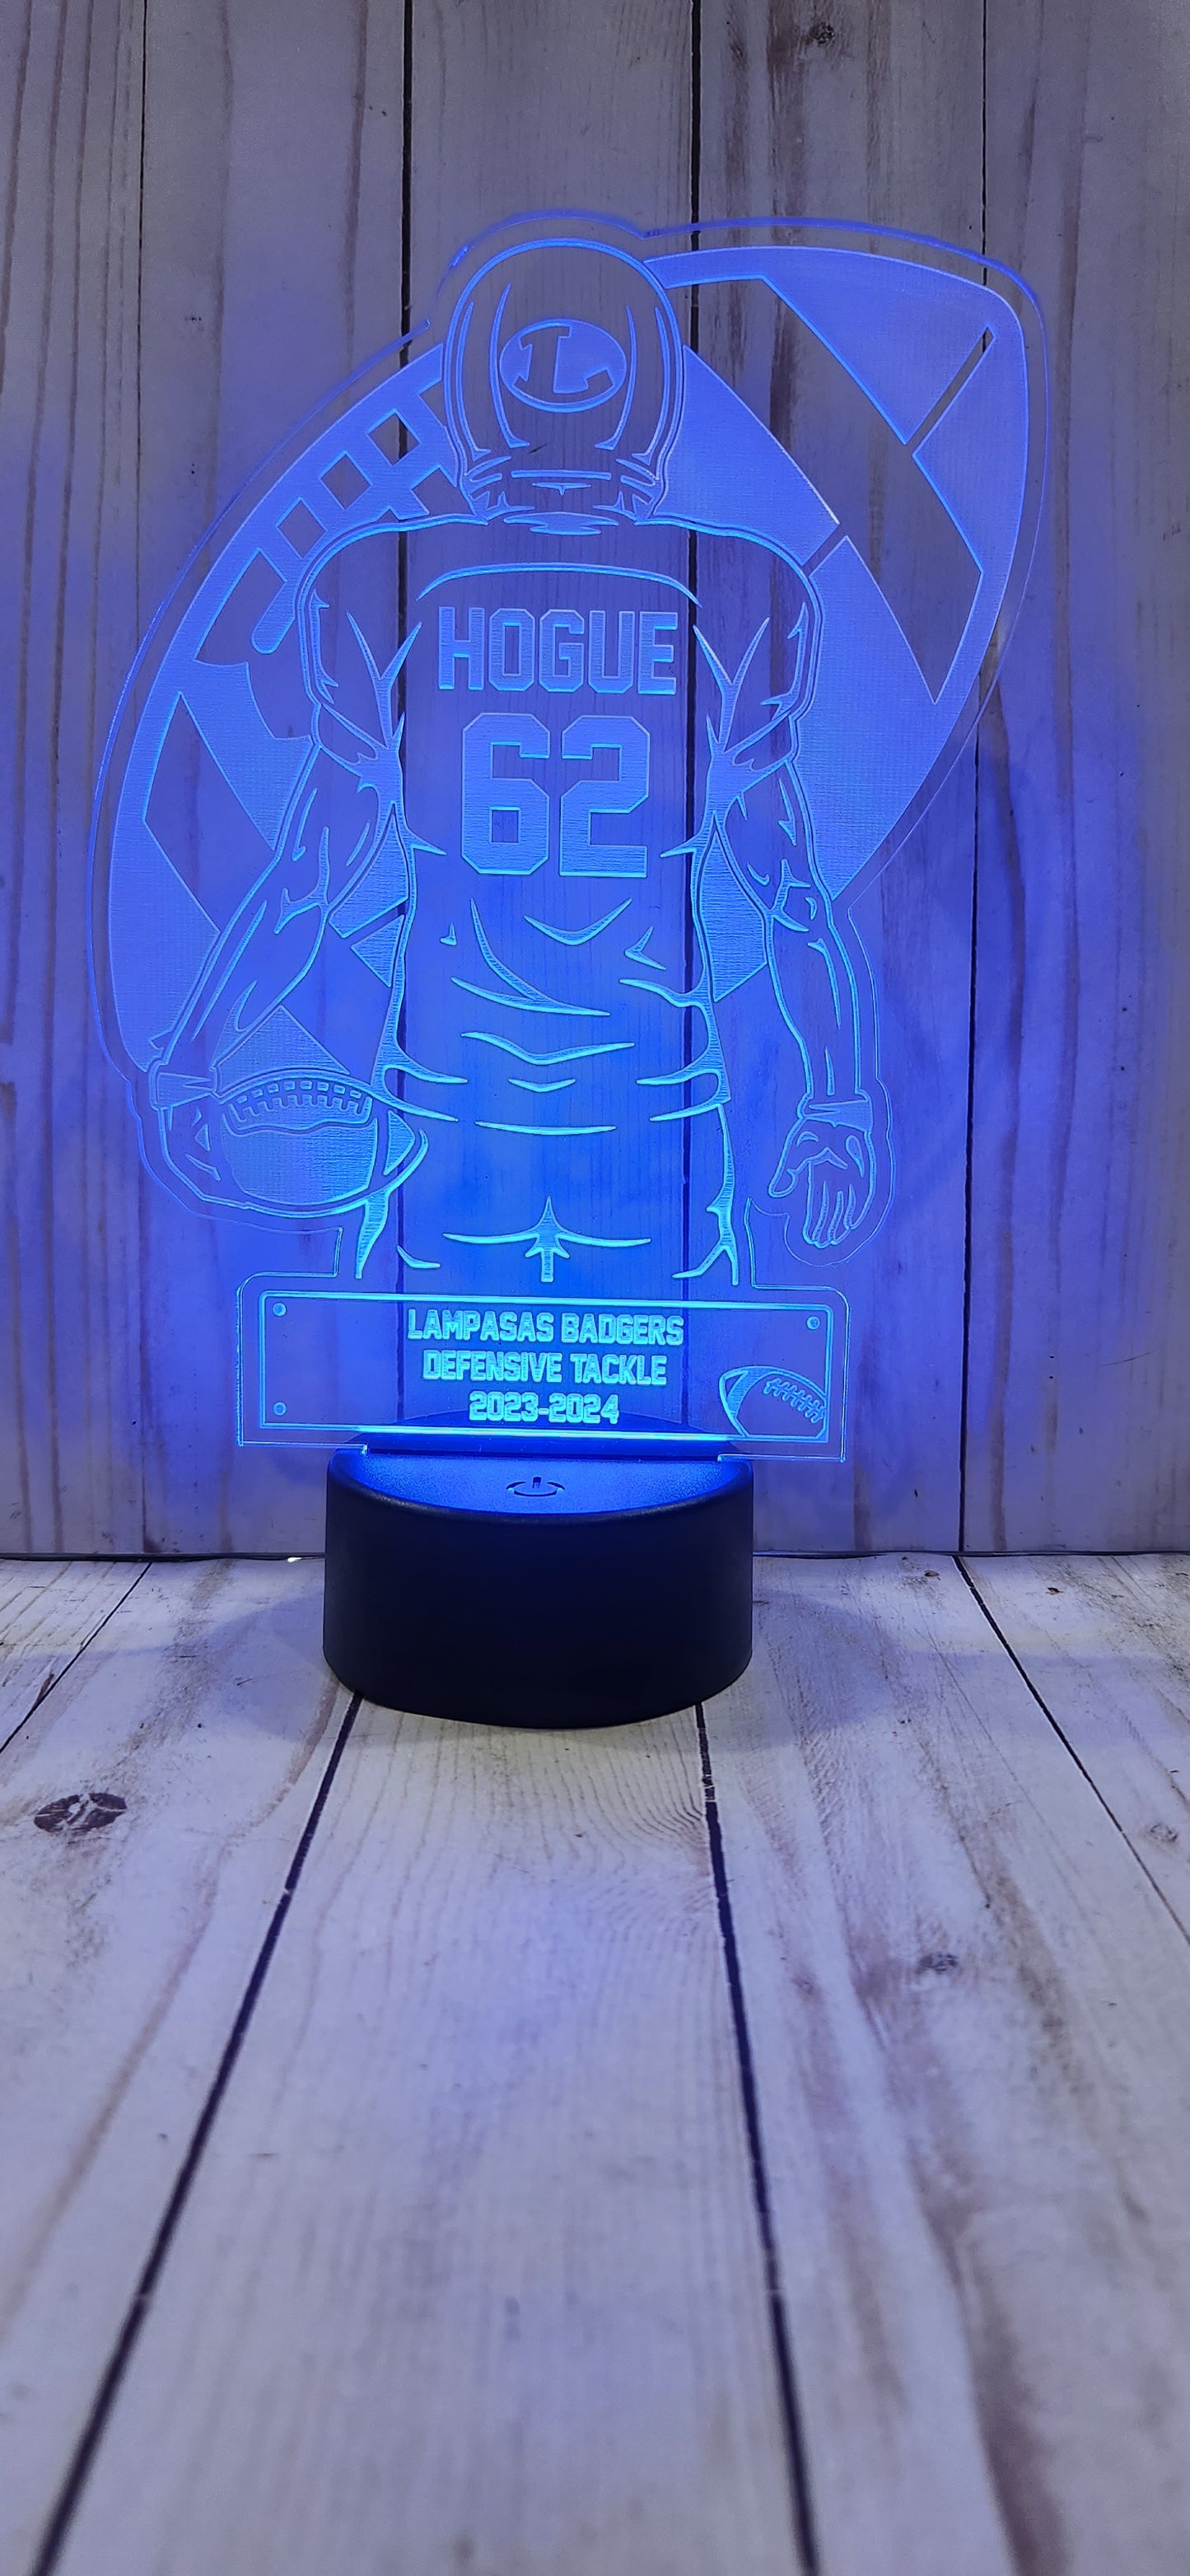 LED - Football Player - Personalized